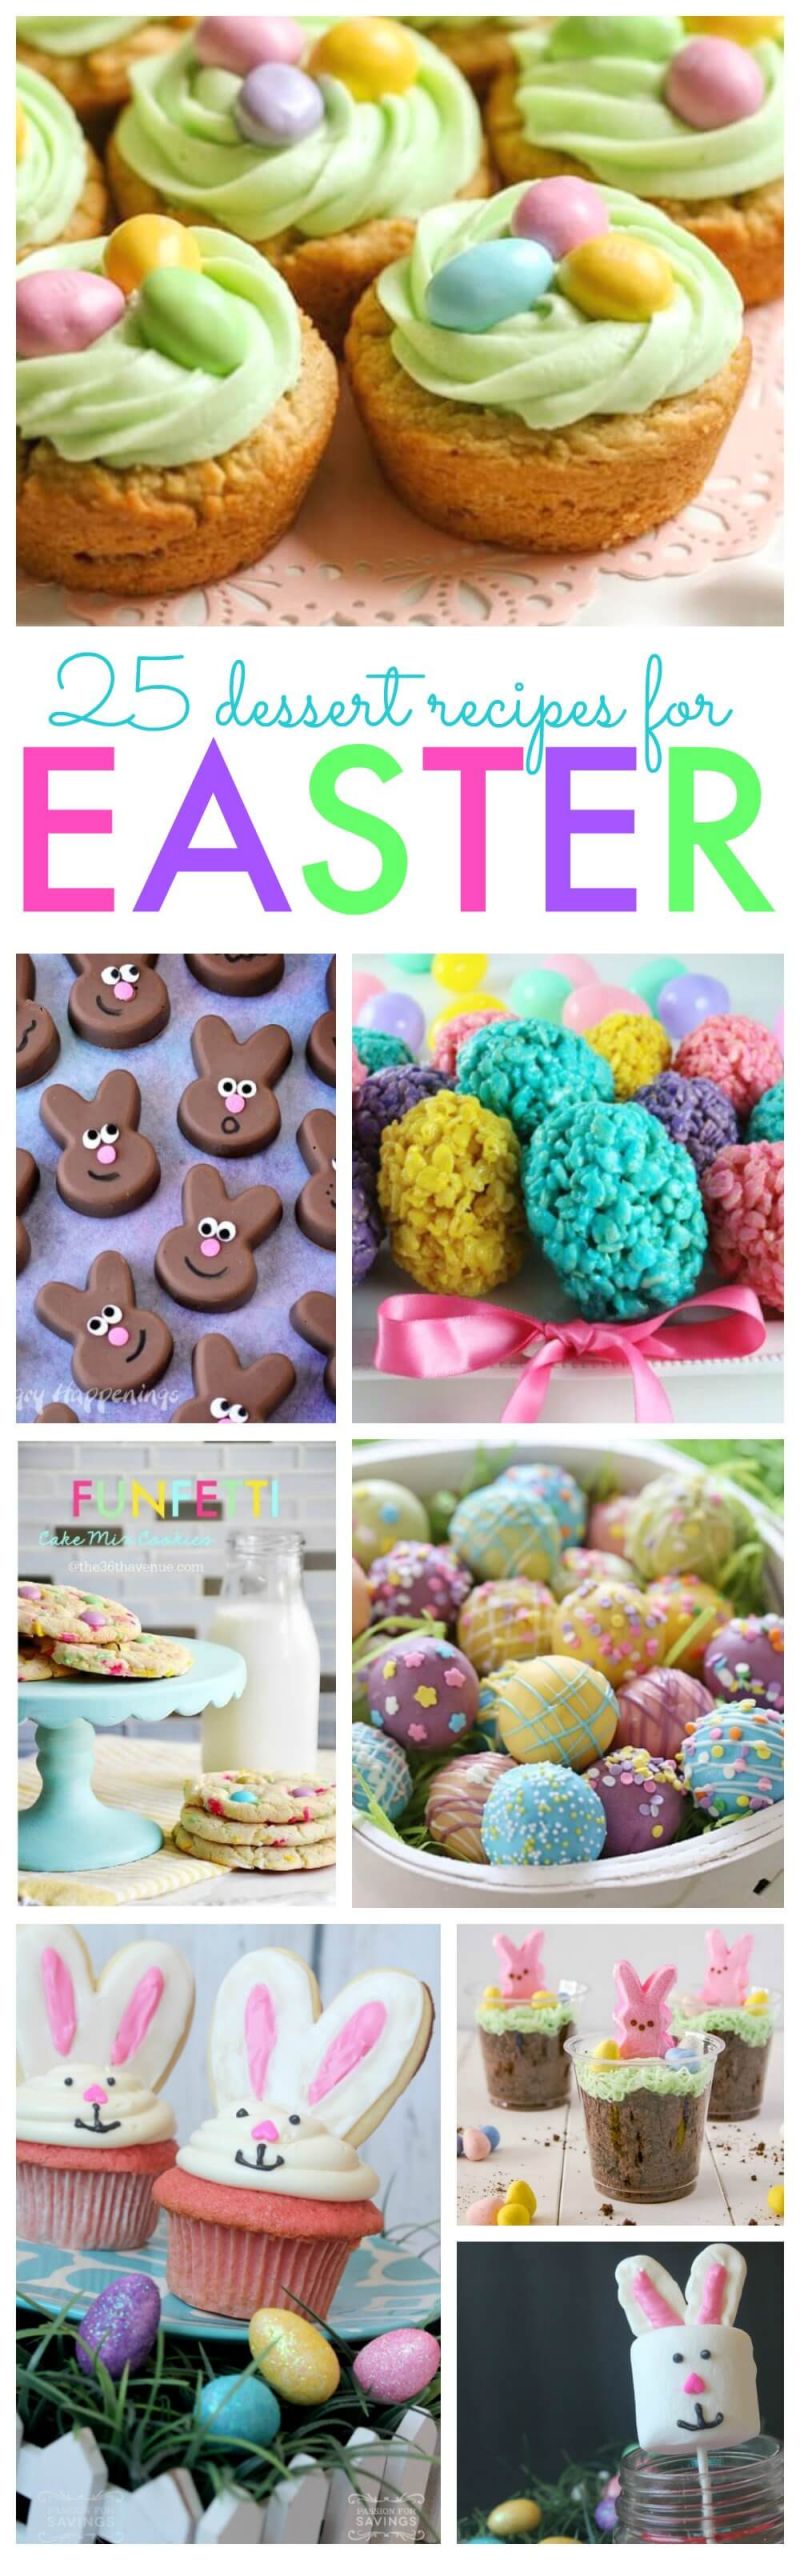 Easter Brunch Desserts
 Easter Desserts Your Family Will Love